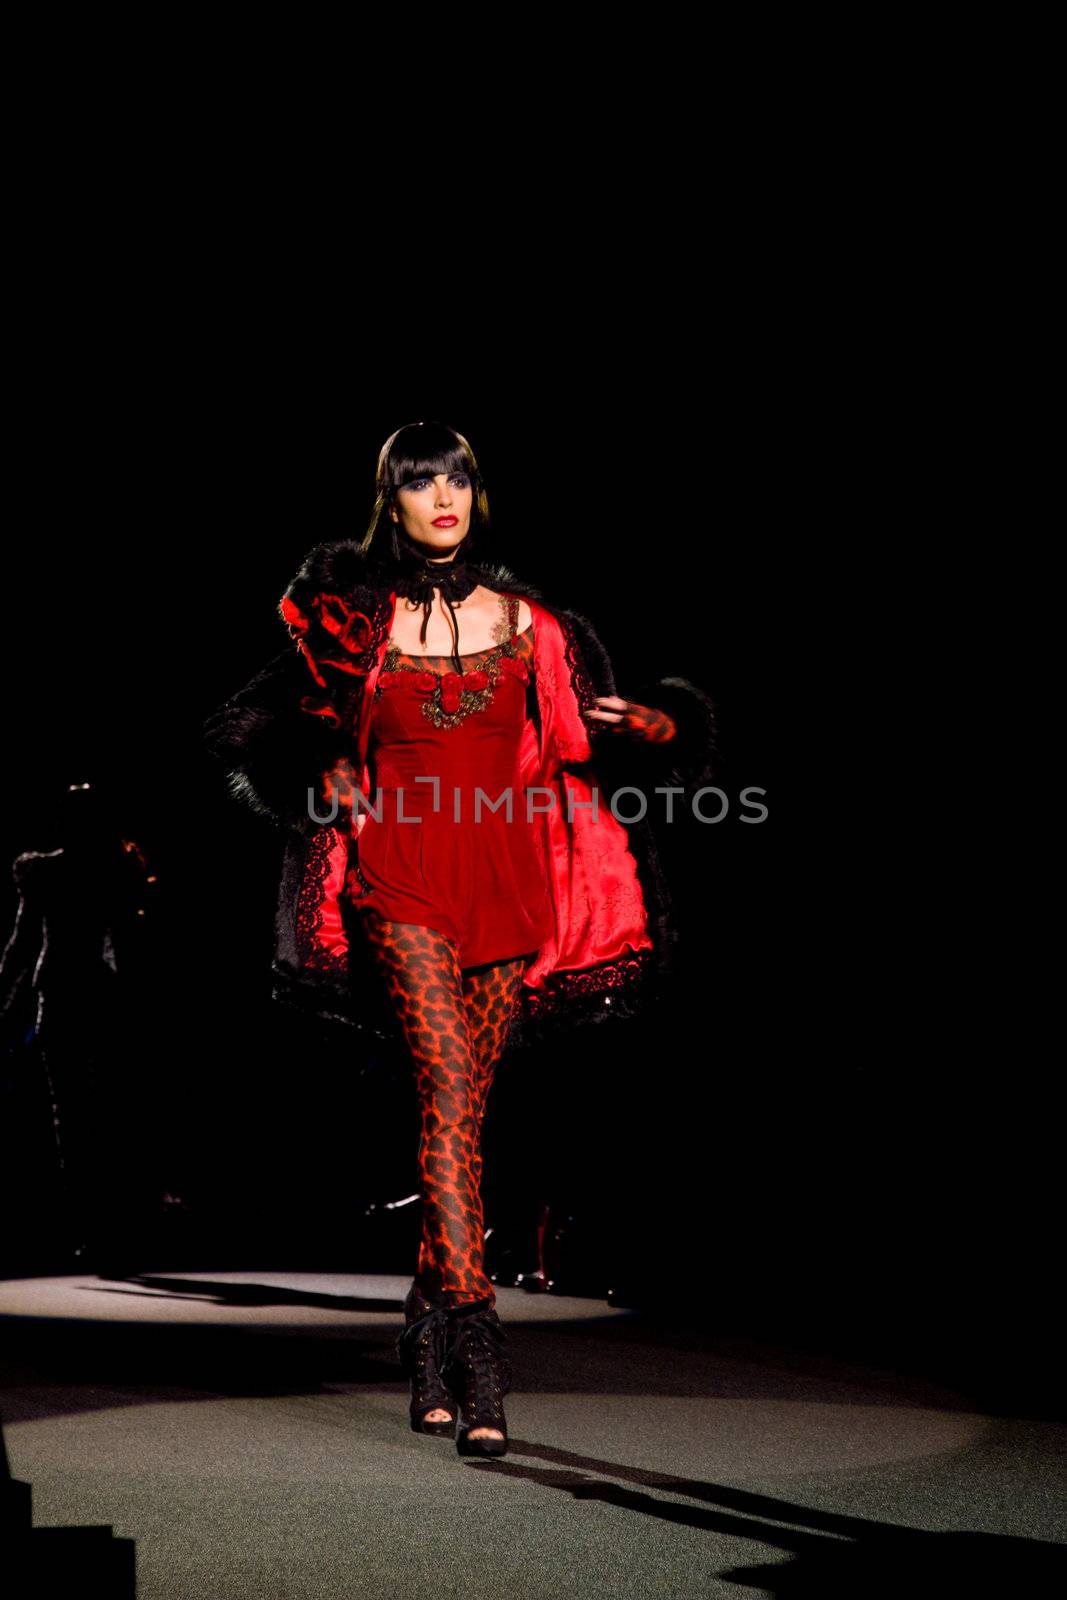 Model at the Betsey Johnson Fall 2011 Collection Runway at Fashion Week New York by photopro